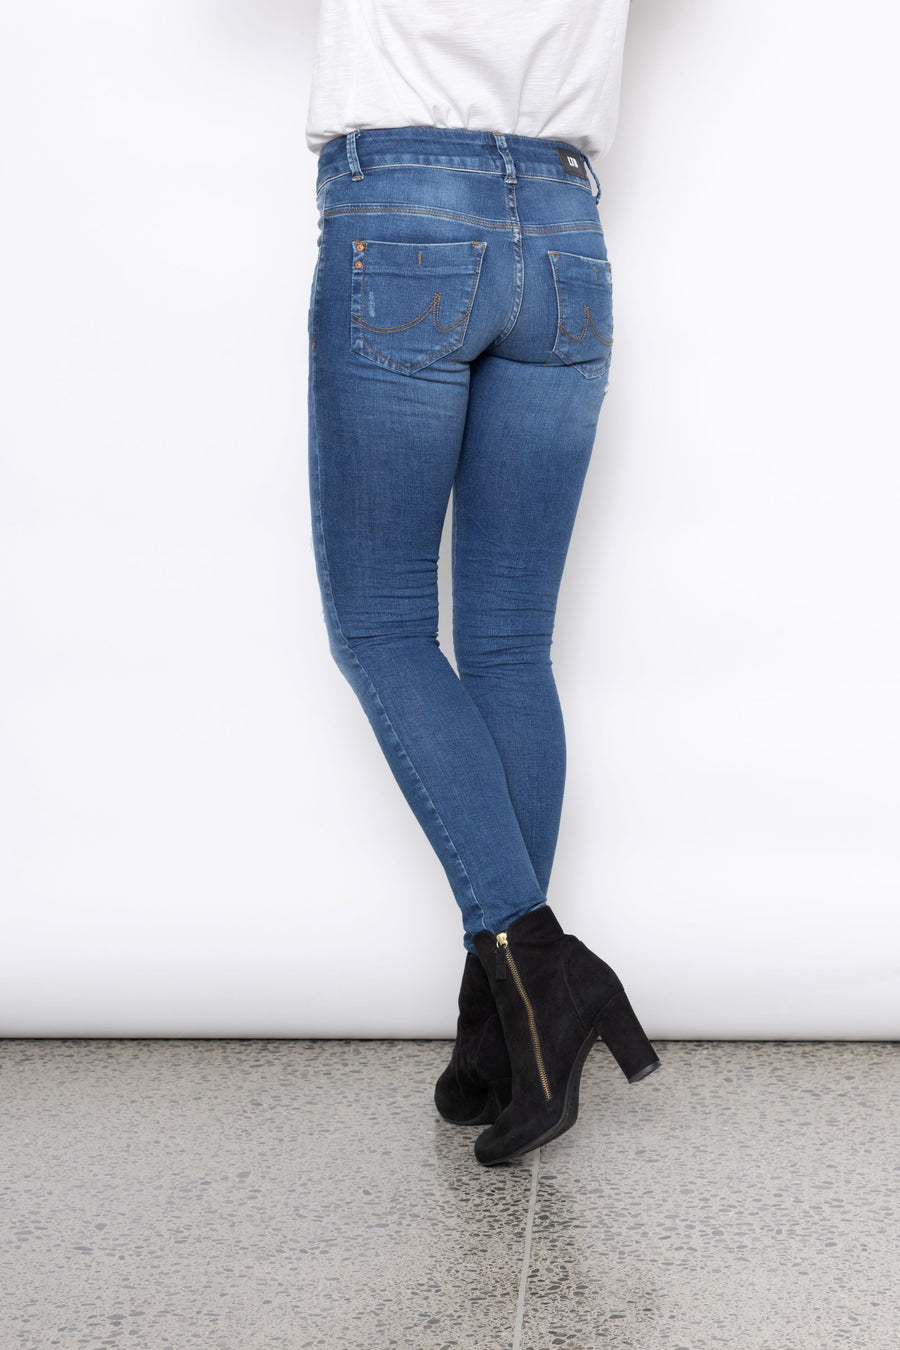 LTB JEANS - MOLLY M - 54266 ROSALES WASH